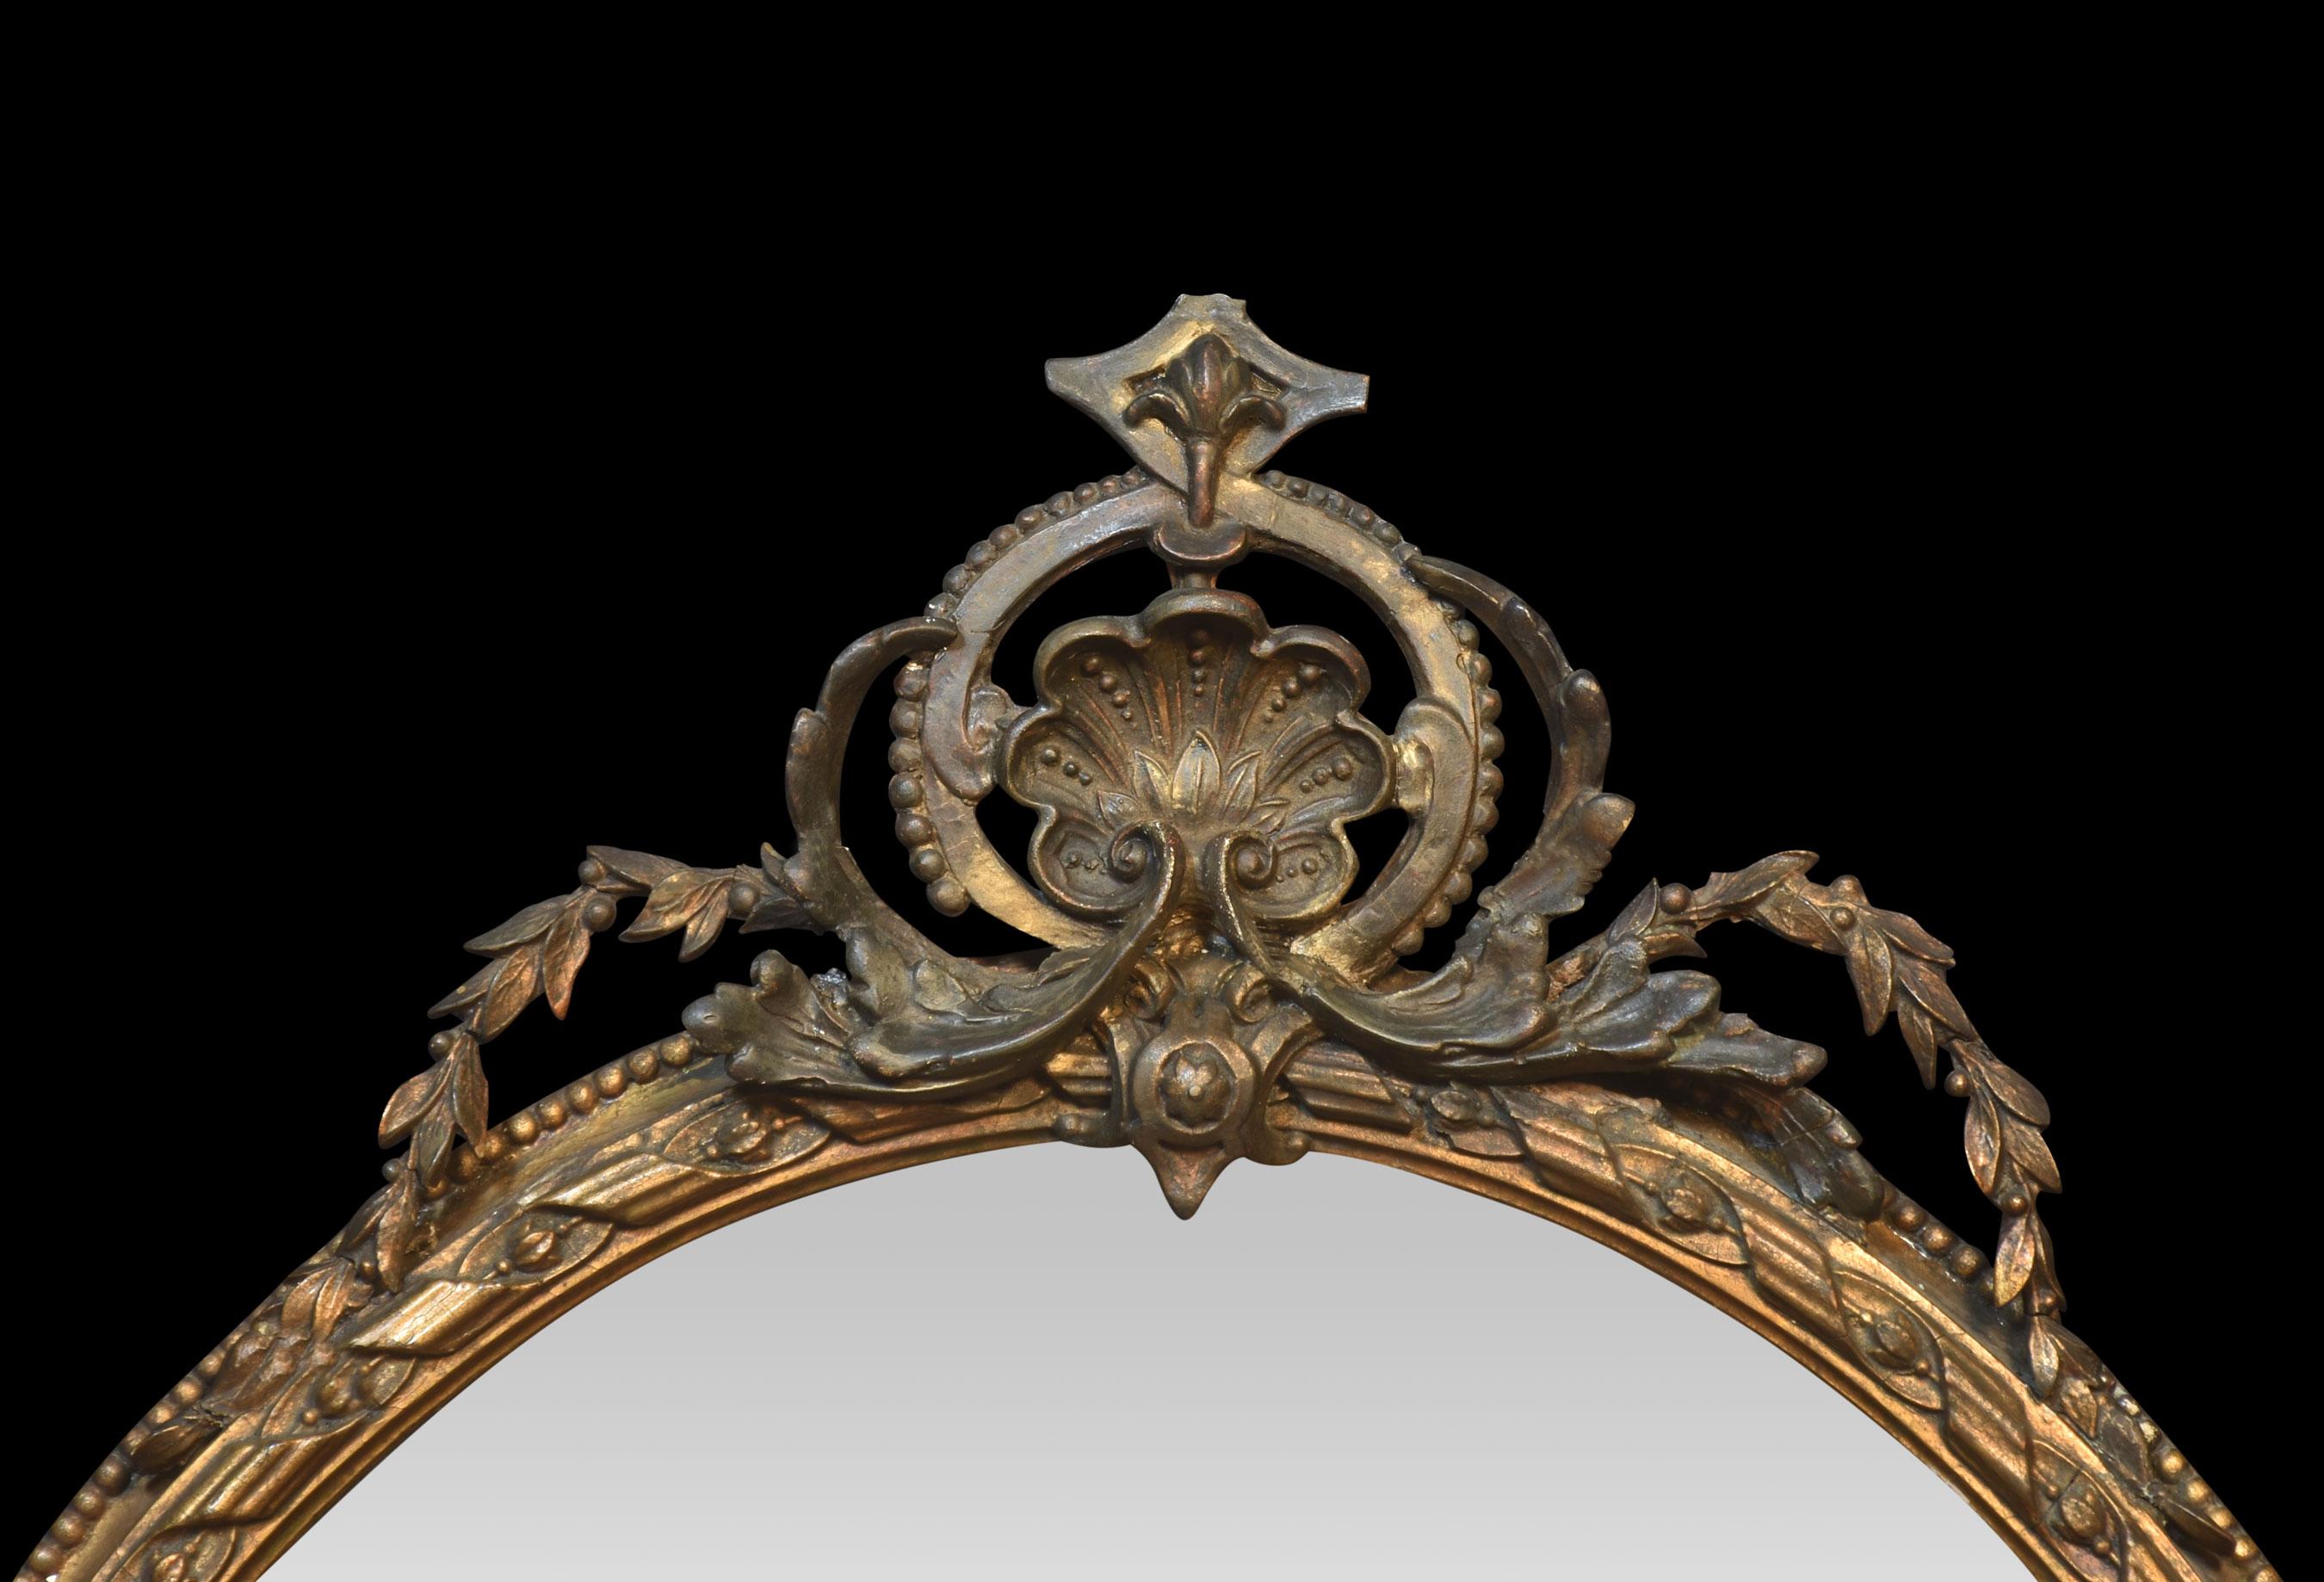 Pair of gilt girandole wall mirrors the oval frames with ribbon decoration above moulded frames having twin branch scones which have been converted for electricity.
Dimensions
Height 40 Inches
Width 22.5 Inches
Depth 6 Inches.